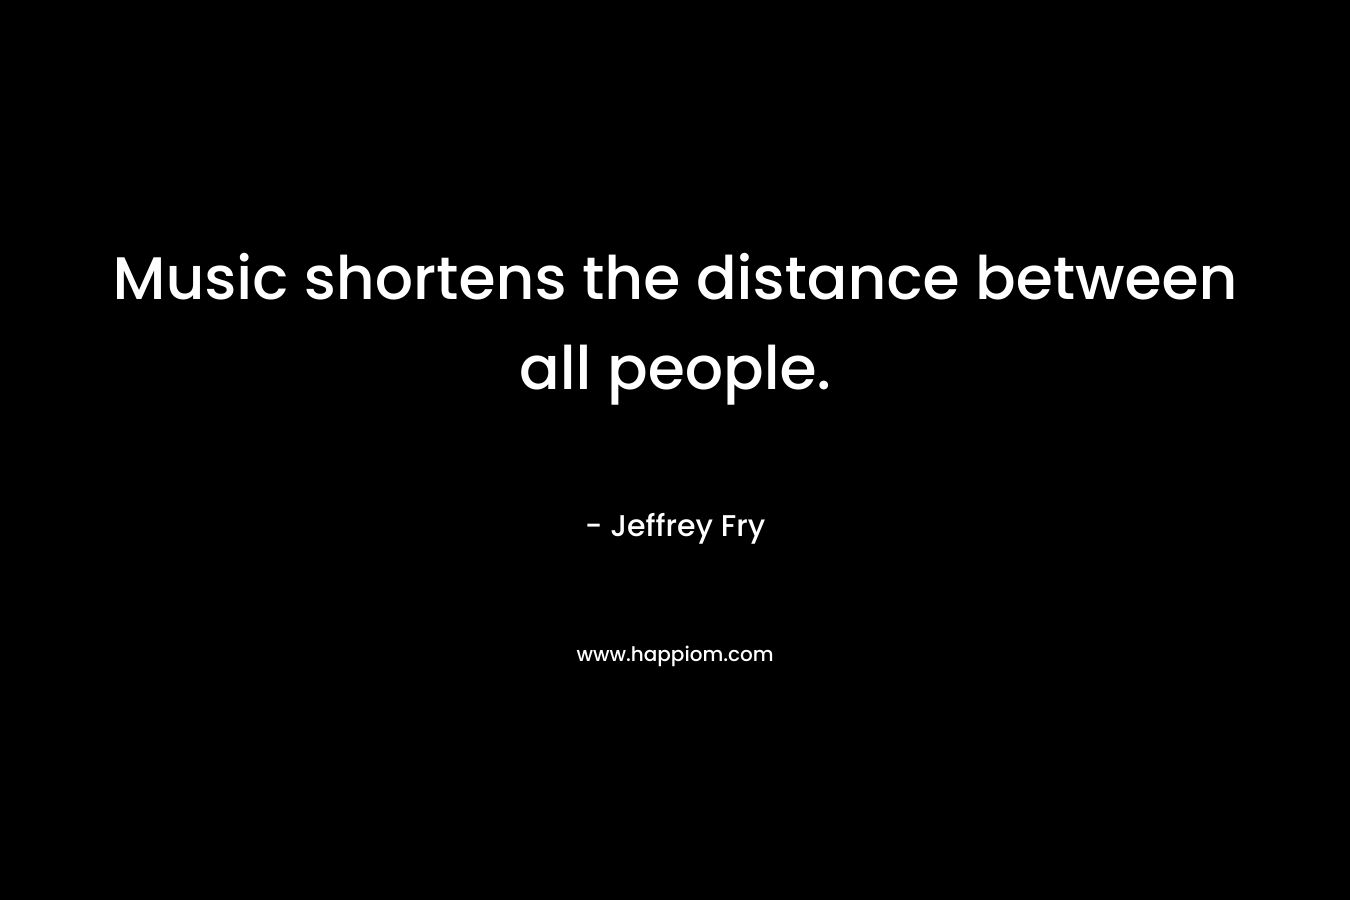 Music shortens the distance between all people.